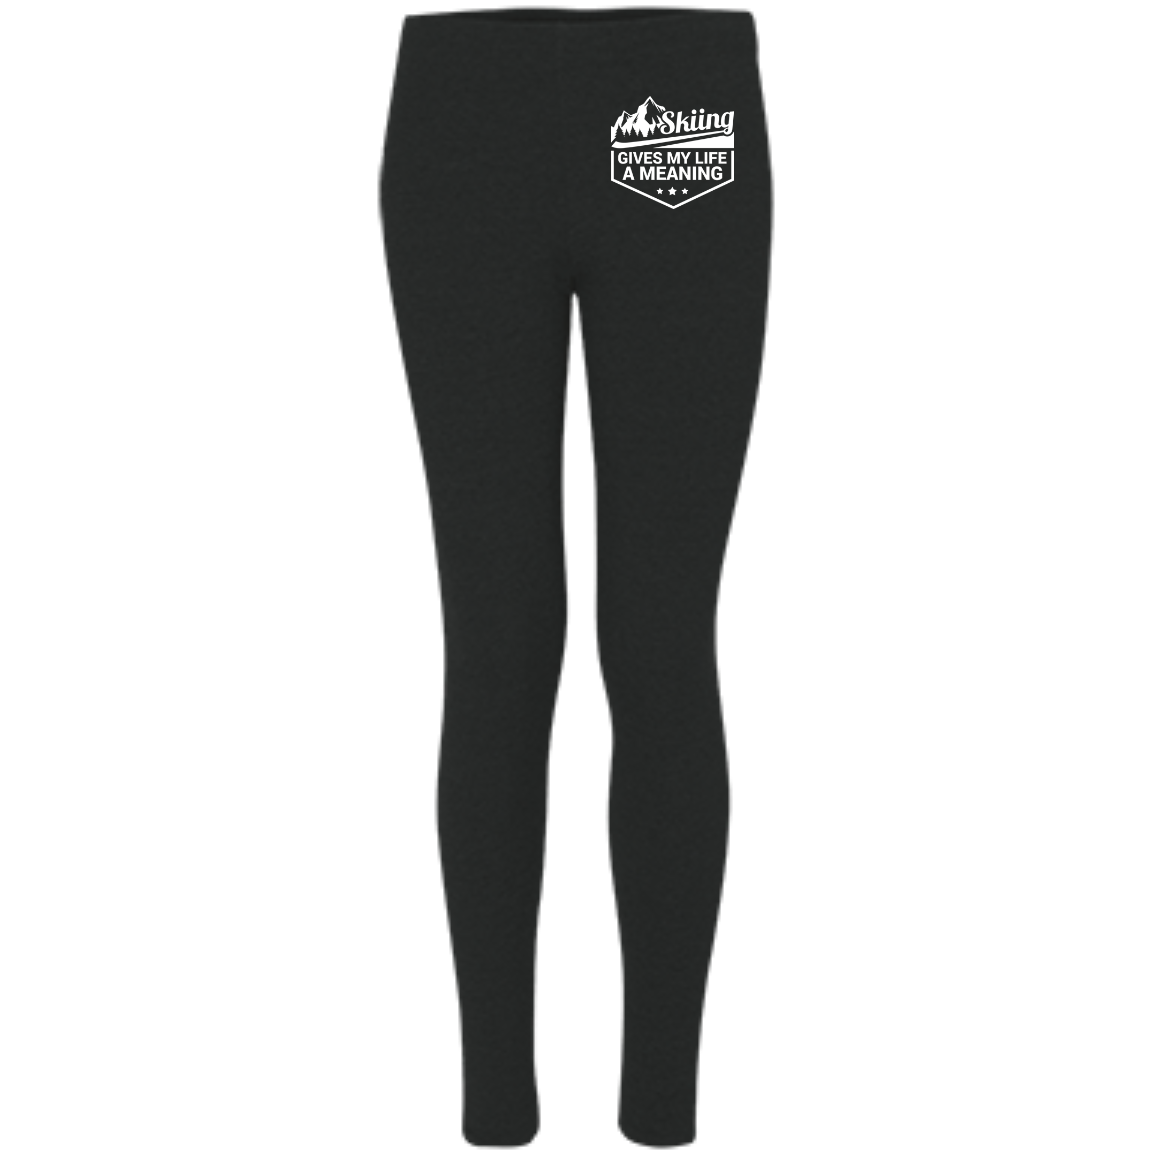 Skiing Gives My Life A Meaning Women's Embroidered Leggings - Powderaddicts